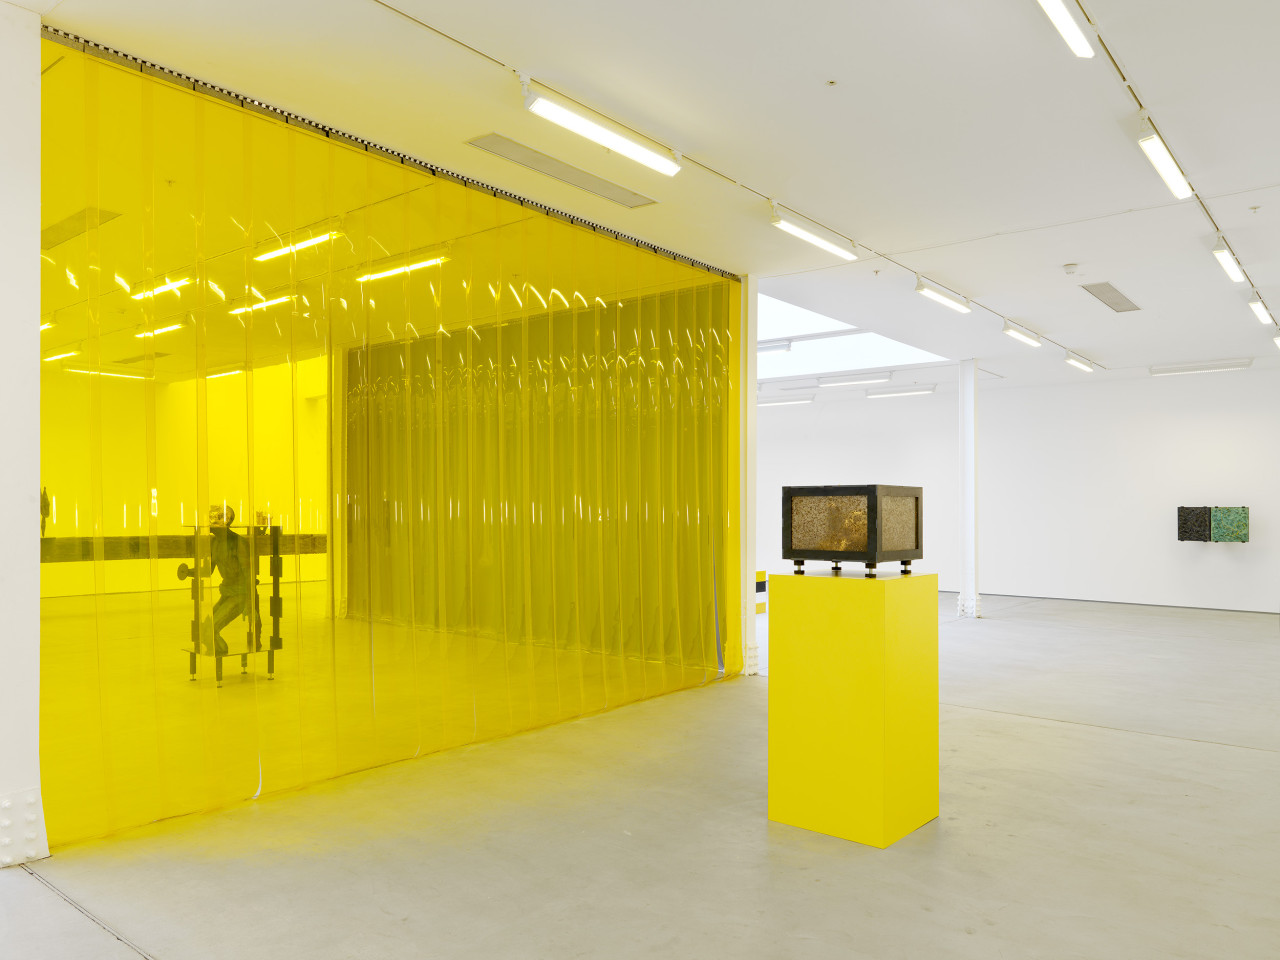 Steven Claydon, The Gilded Bough, installation view, Sadie Coles HQ, London, 2016. © the artist, image courtesy Sadie Coles HQ, London. Photograph: Todd White, London.